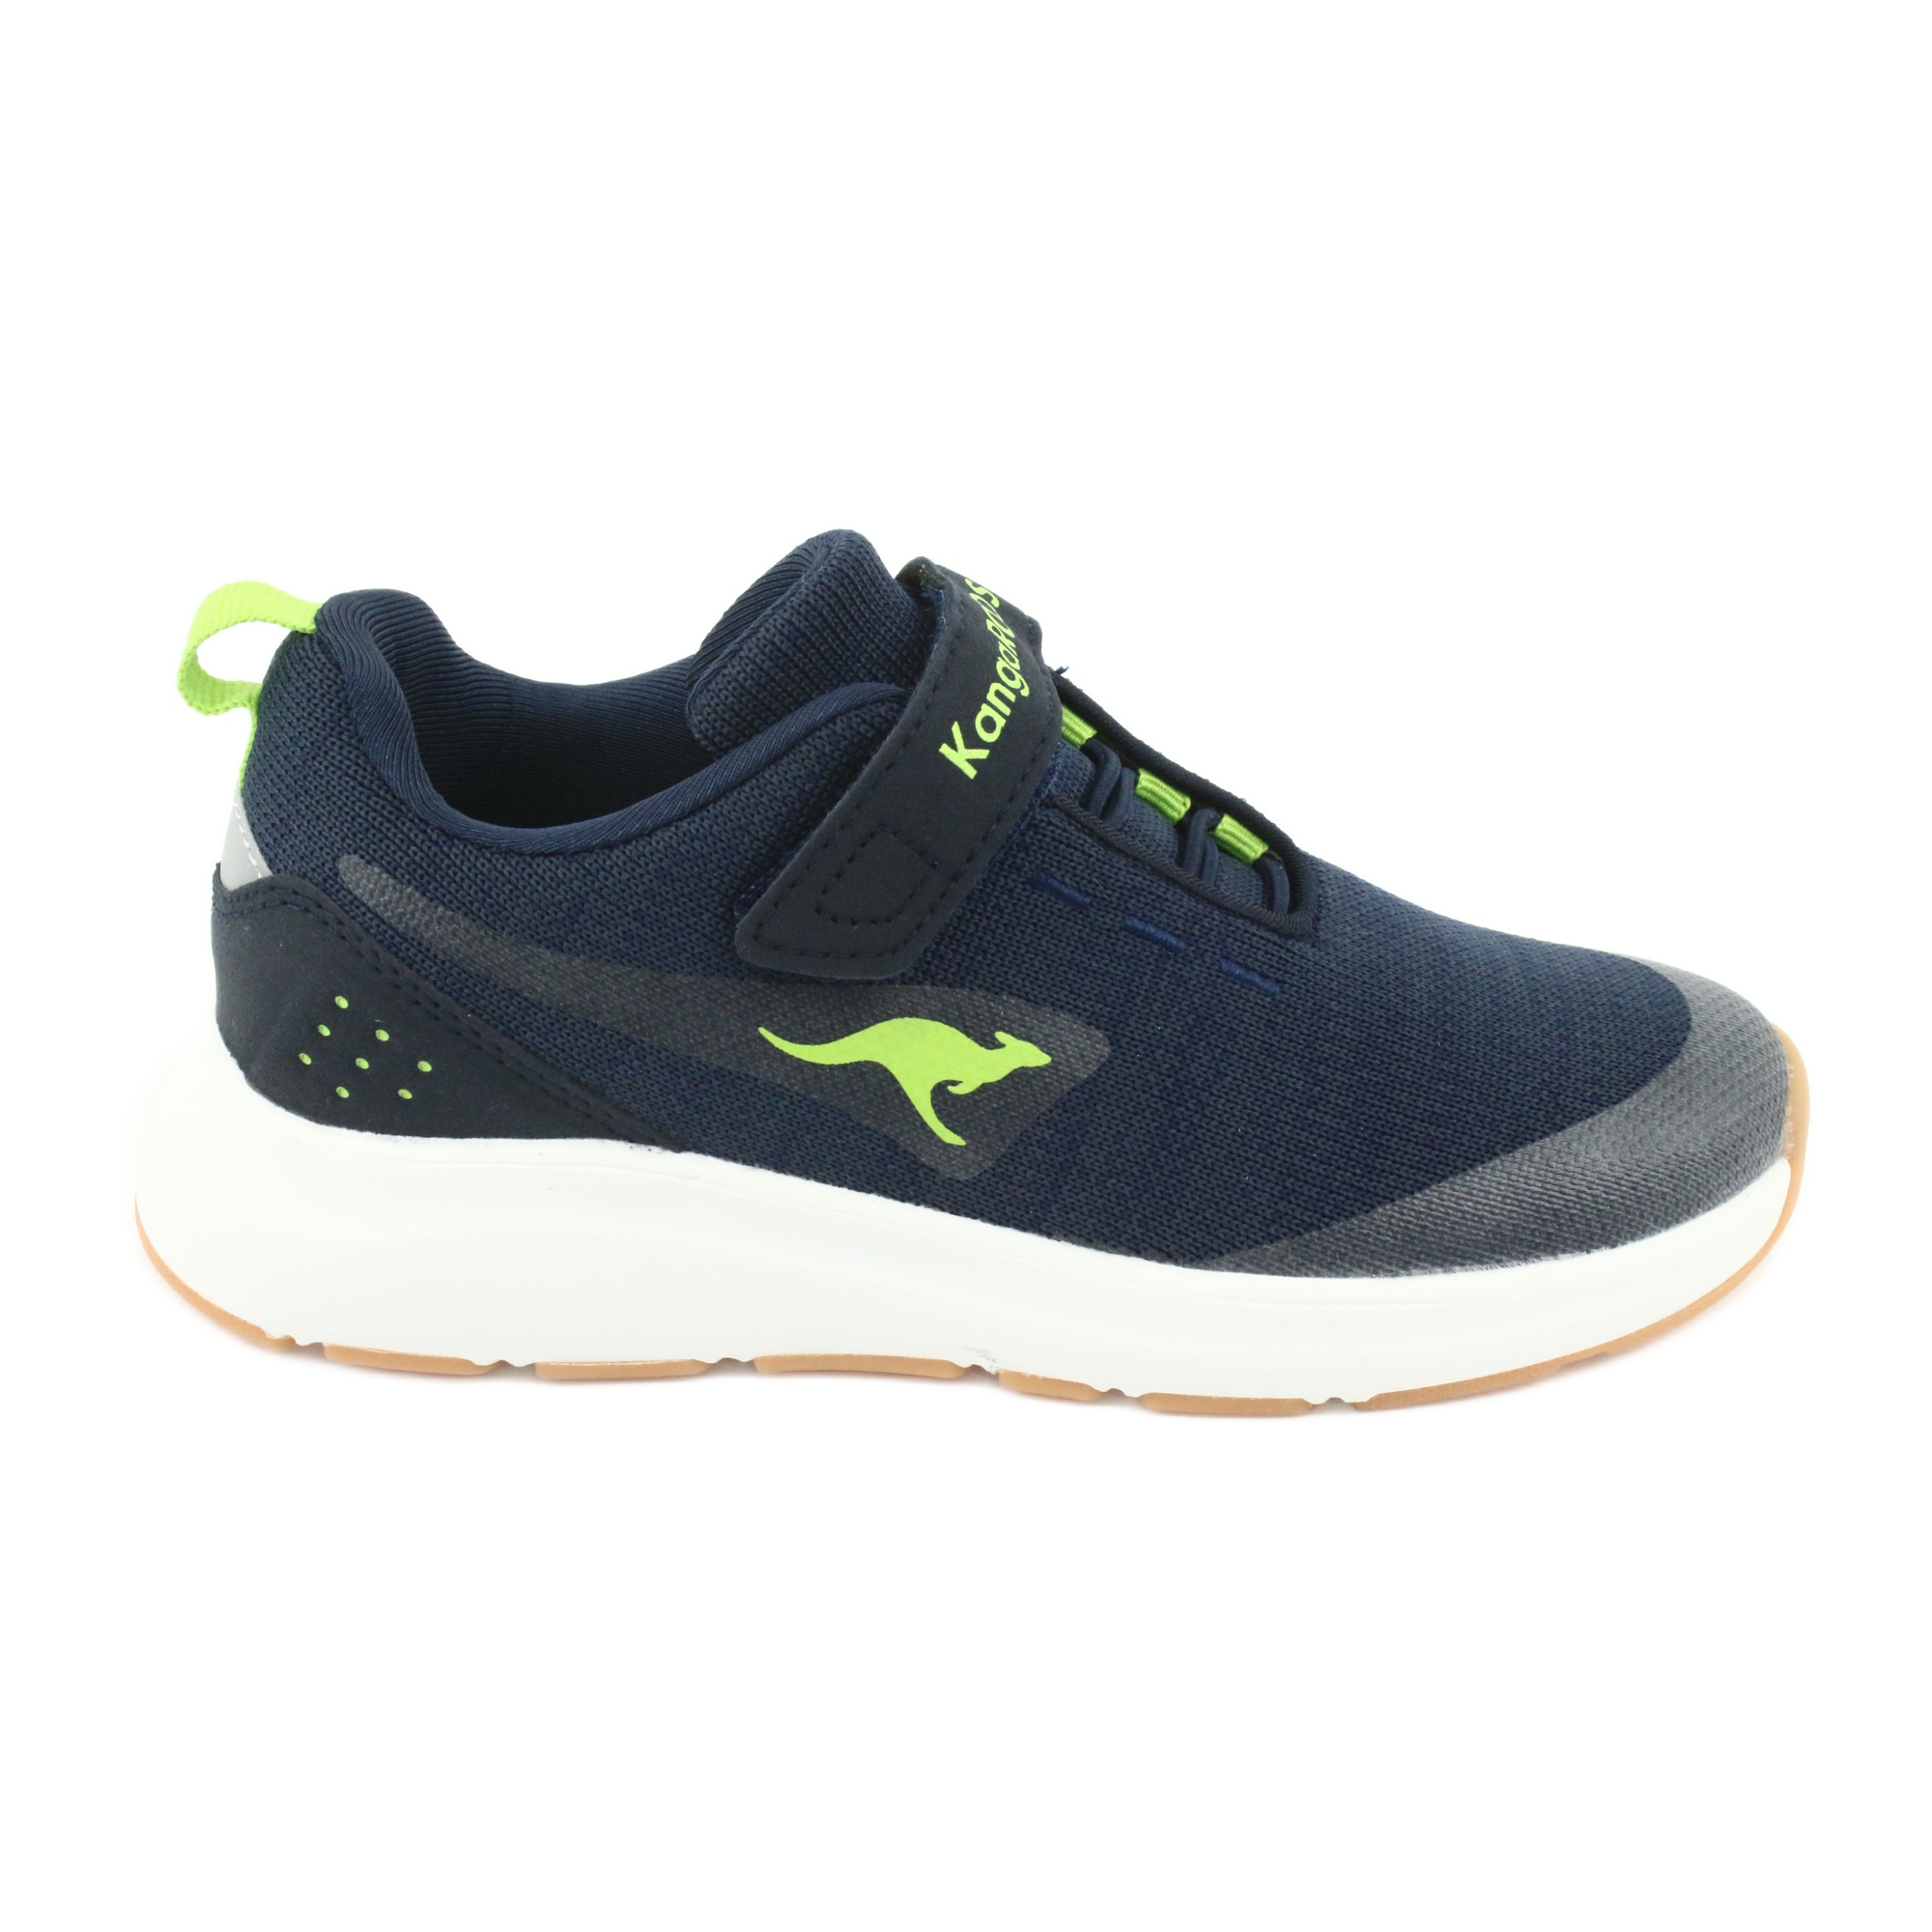 KangaROOS sports with Velcro navy / lime green - KeeShoes